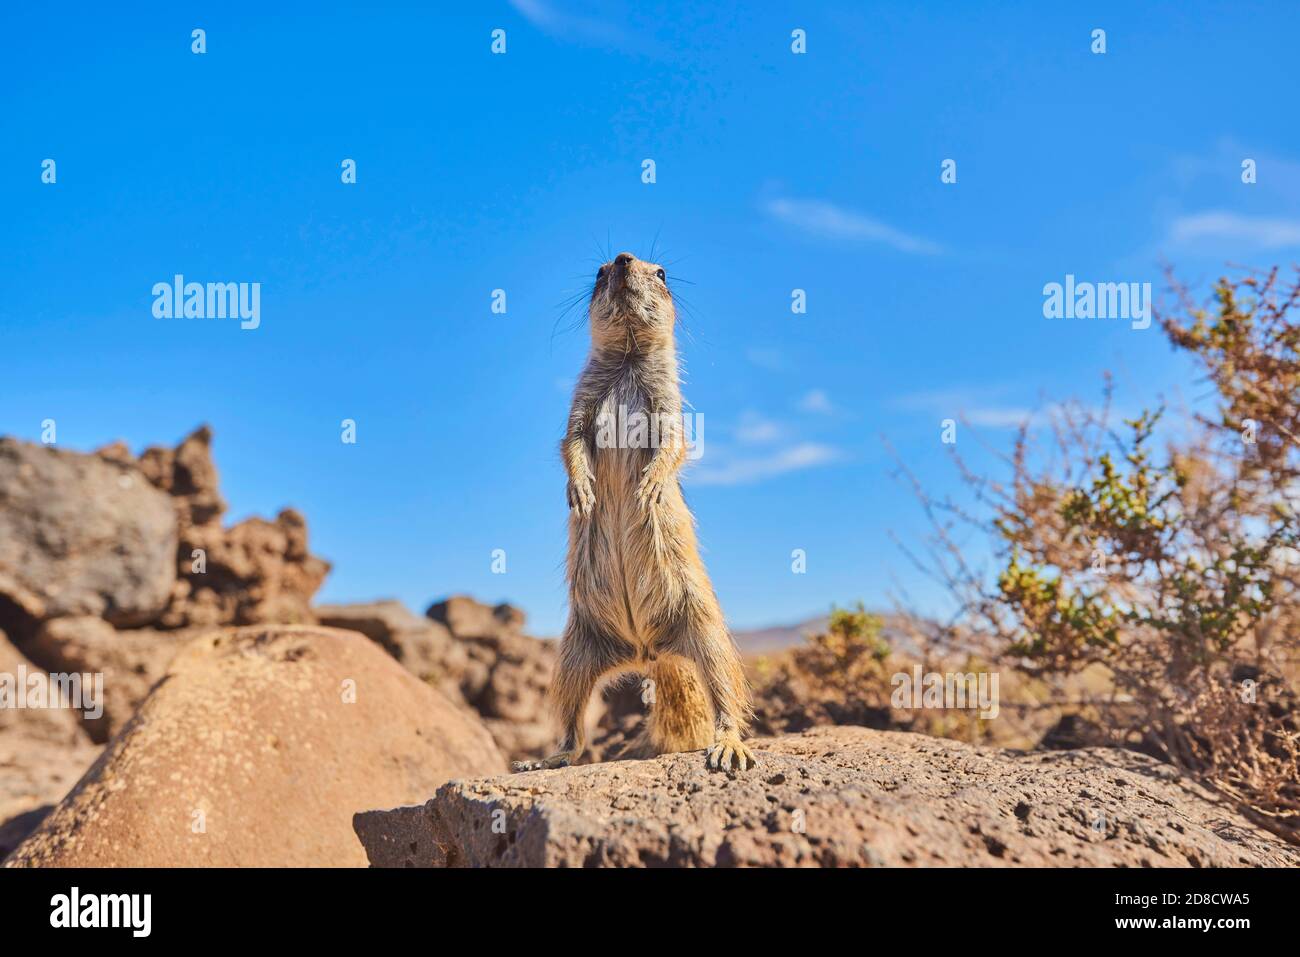 barbary ground squirrel, North African ground squirrel (Atlantoxerus getulus), standing erect on a lava stone, front view, Canary Islands, Stock Photo